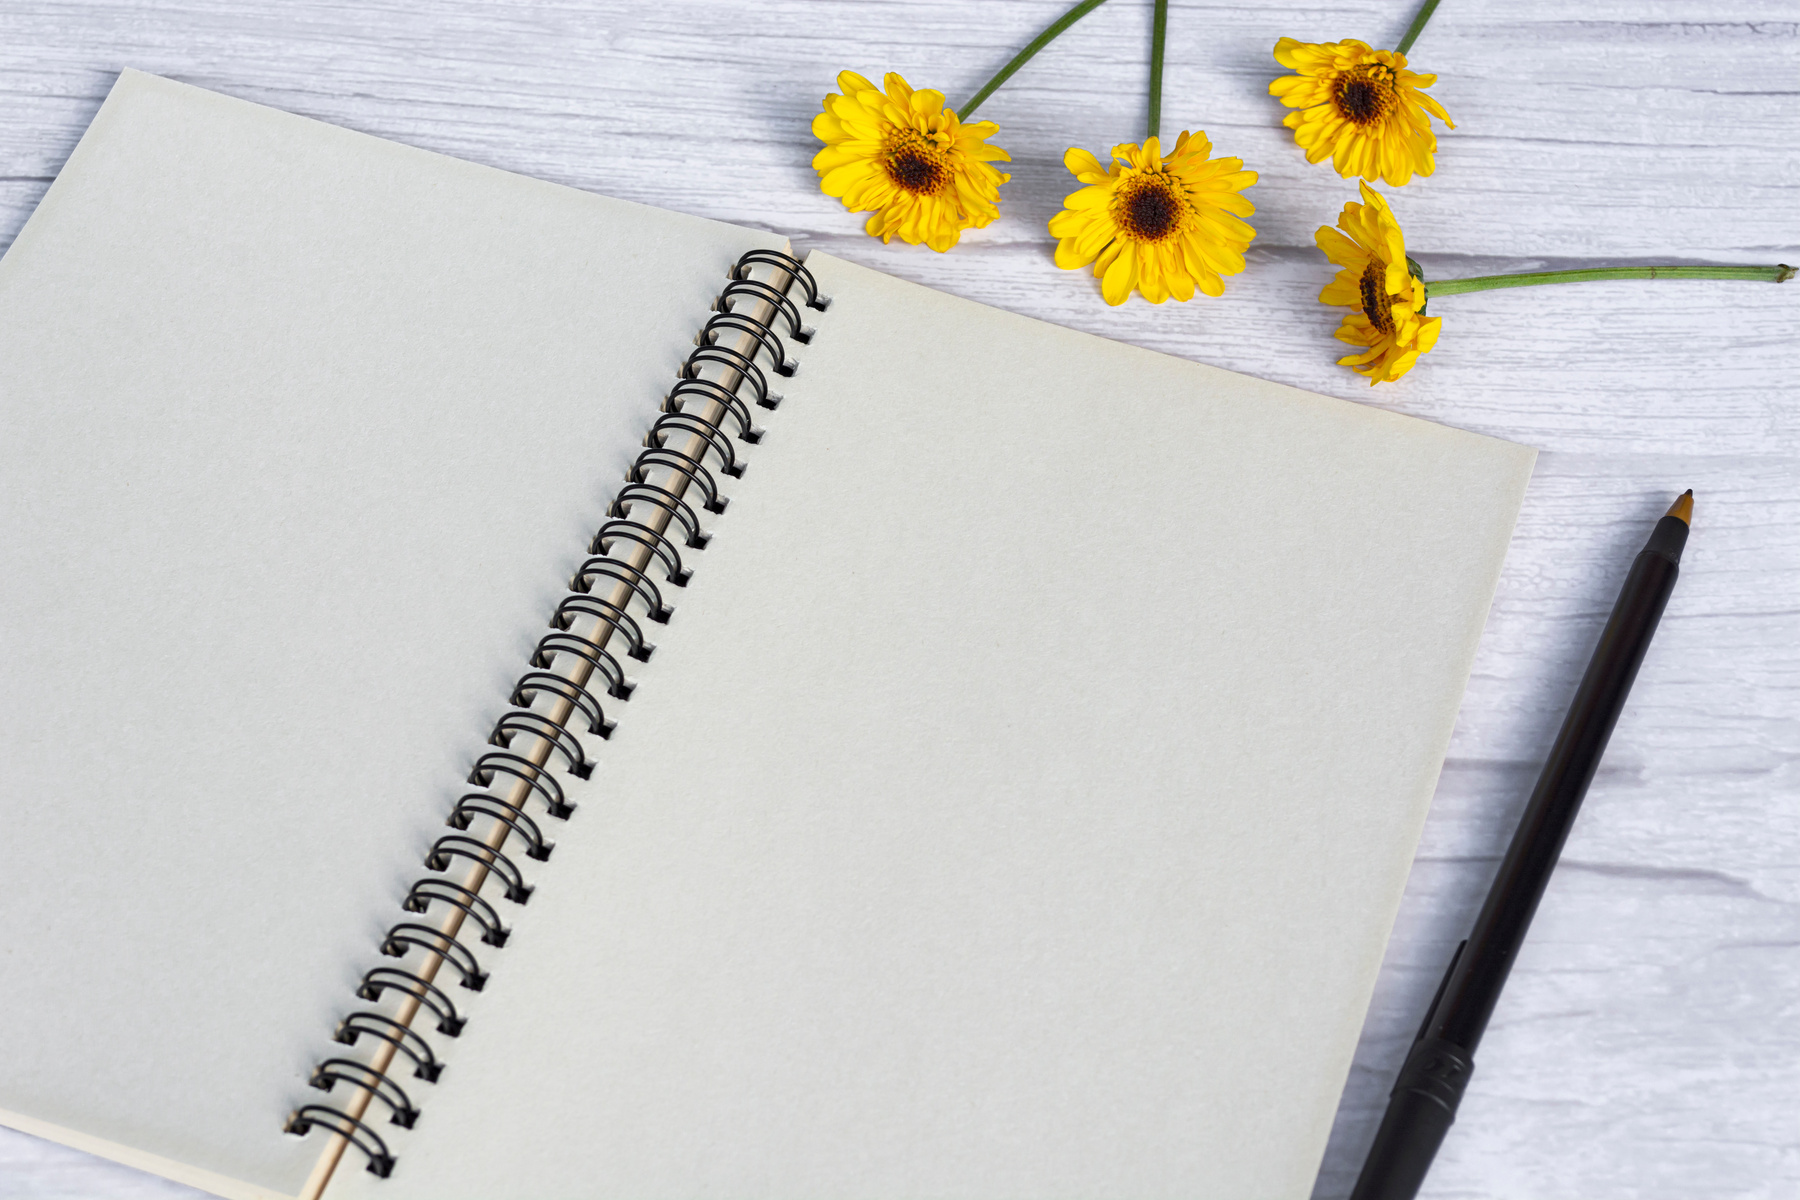 Note book flat lay with sunflowers on wooden desk. Directly